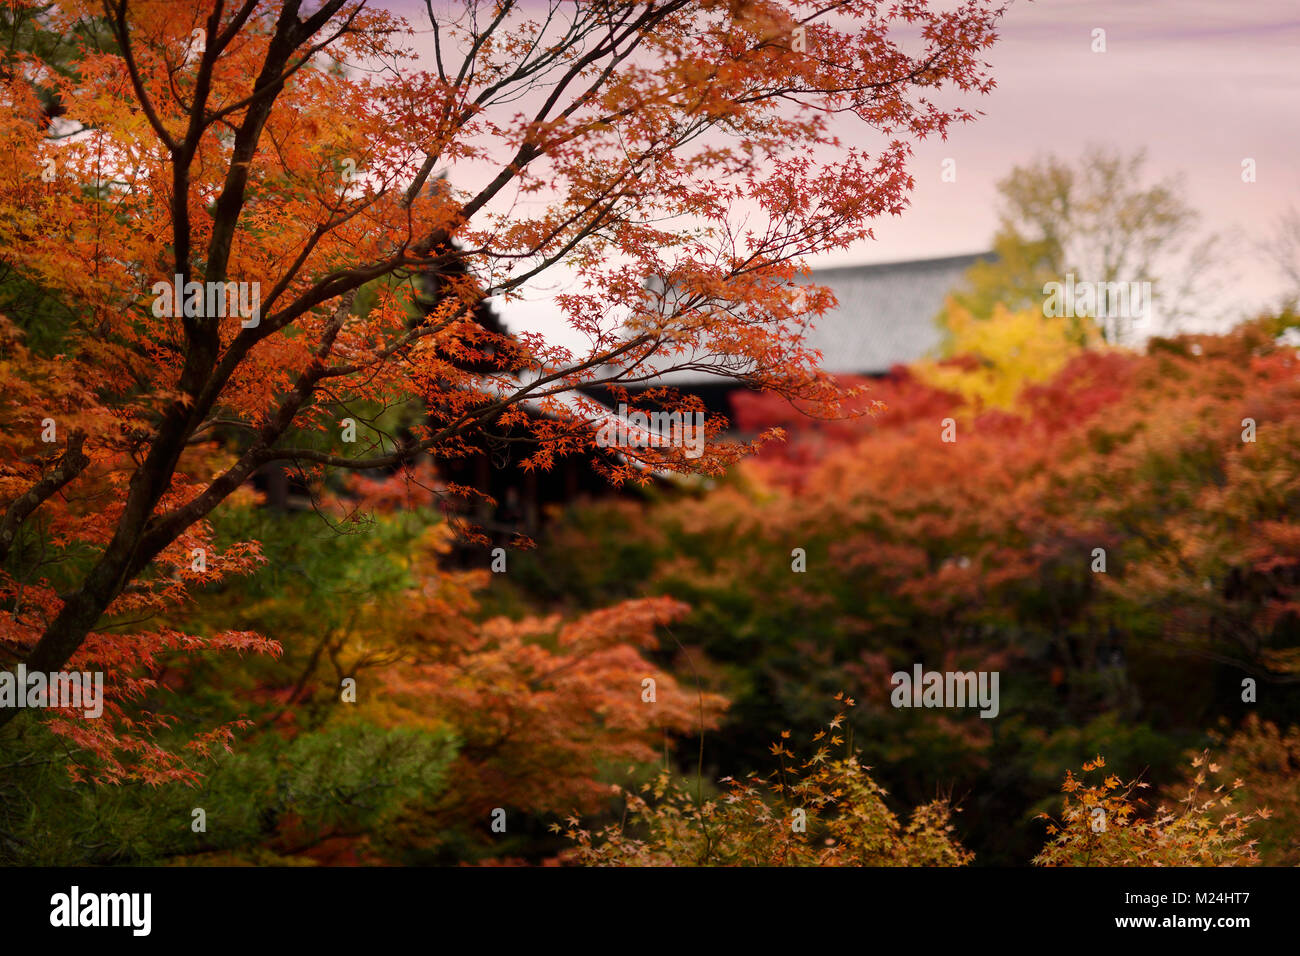 Colorful autumn scenery of a Japanese garden with beautiful red maple trees at Tofuku-ji Buddhist temple in Kyoto, Japan 2017. Stock Photo